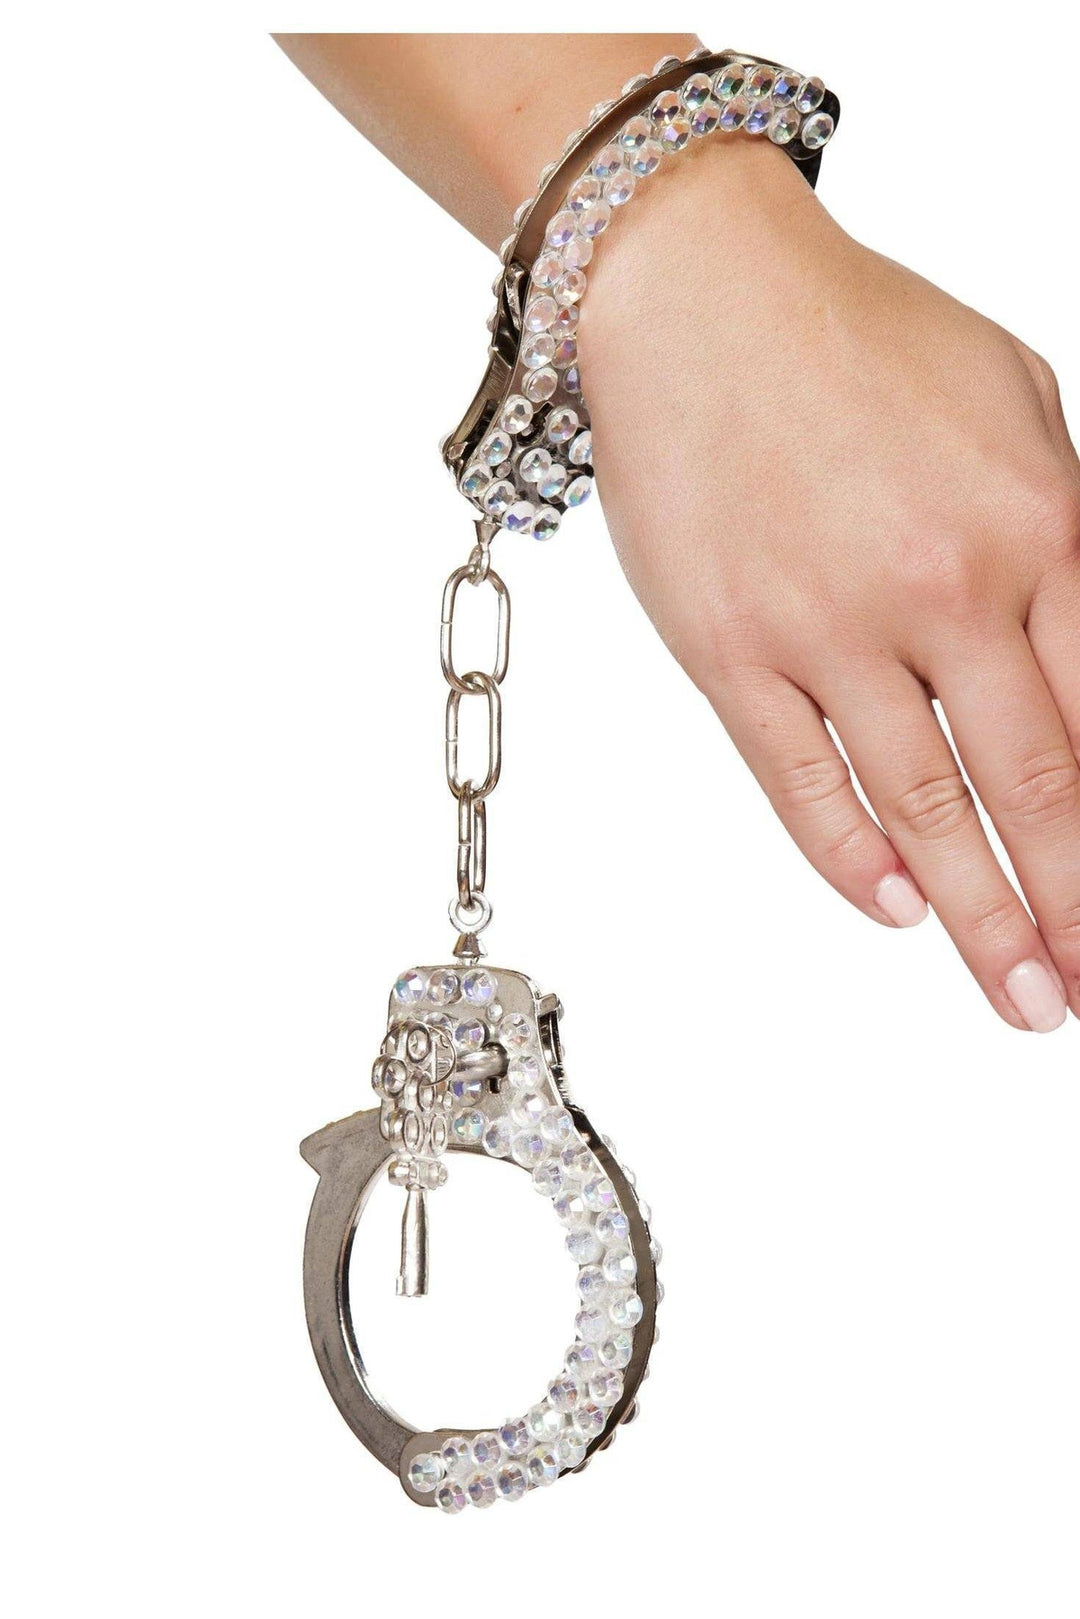 Roma Silver Handcuffs with Rhinestones-SEXYSHOES.COM